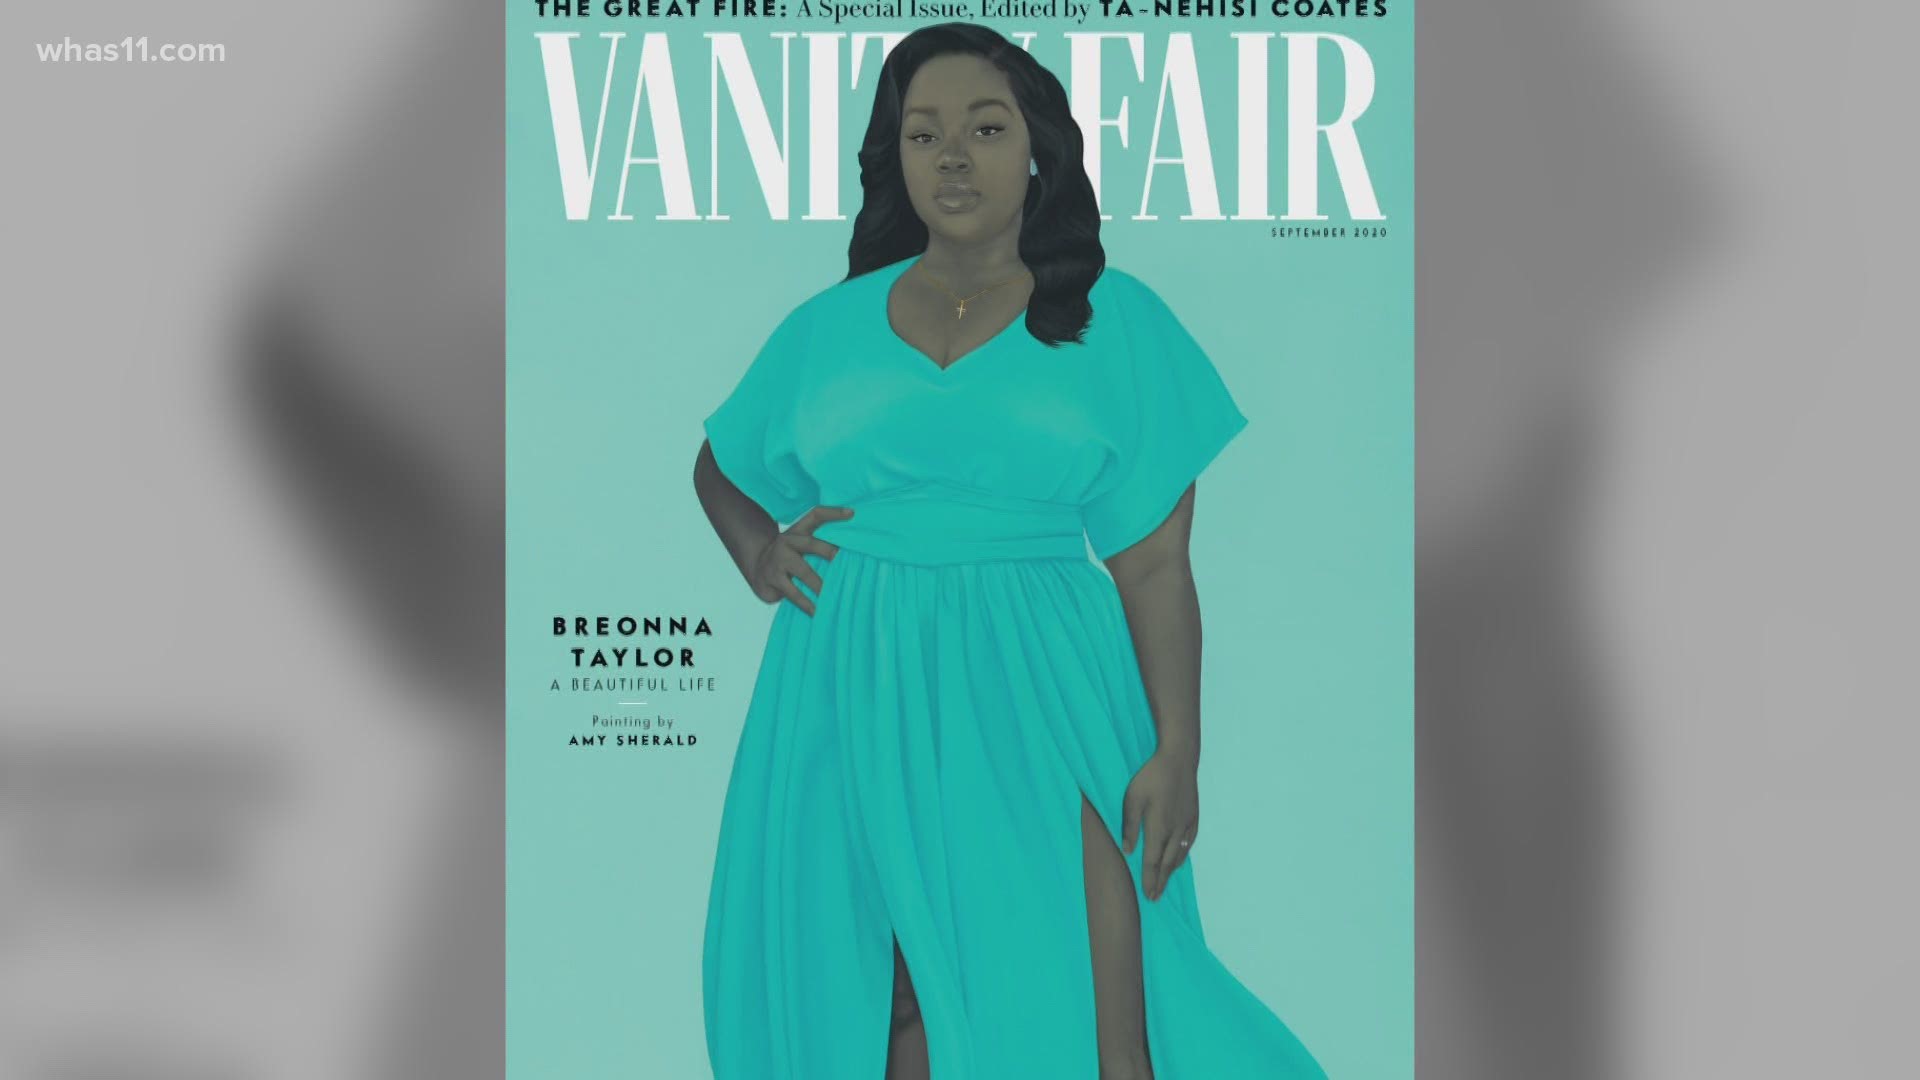 In Vanity Fair, Amy Sherald says Breonna's portraits draws from her life. With her hand on her hip and gaze straightforward, nothing about the picture is passive.